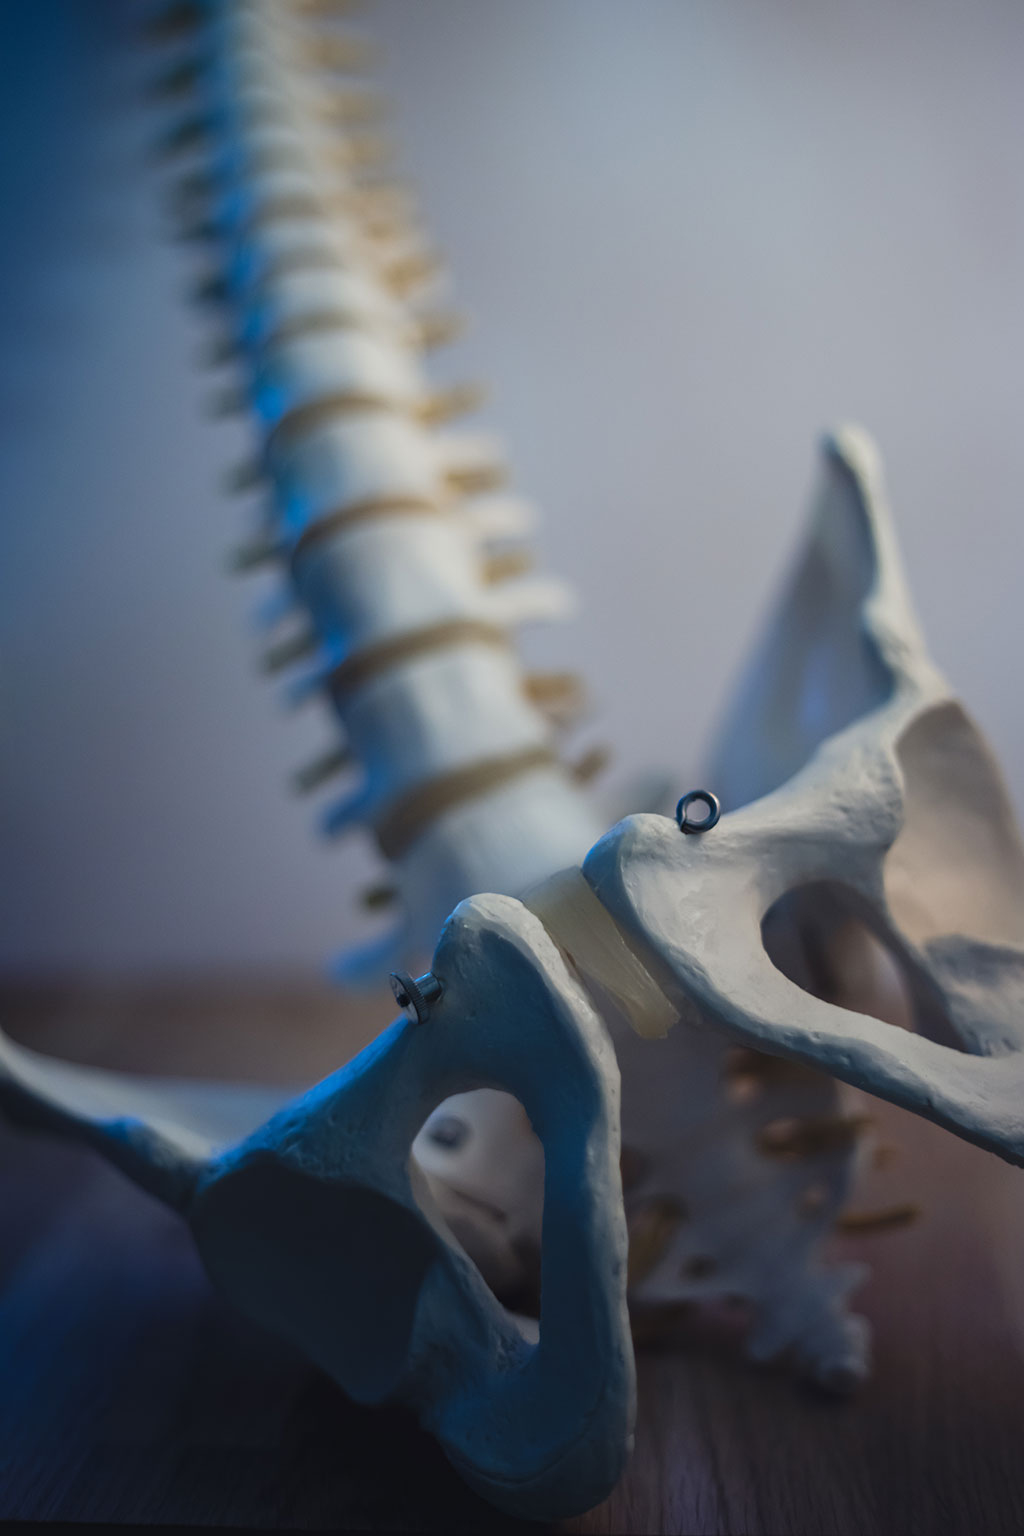 Image: Unique new material has shown significant promise in treatment of spinal cord injury (Photo courtesy of Unsplash)